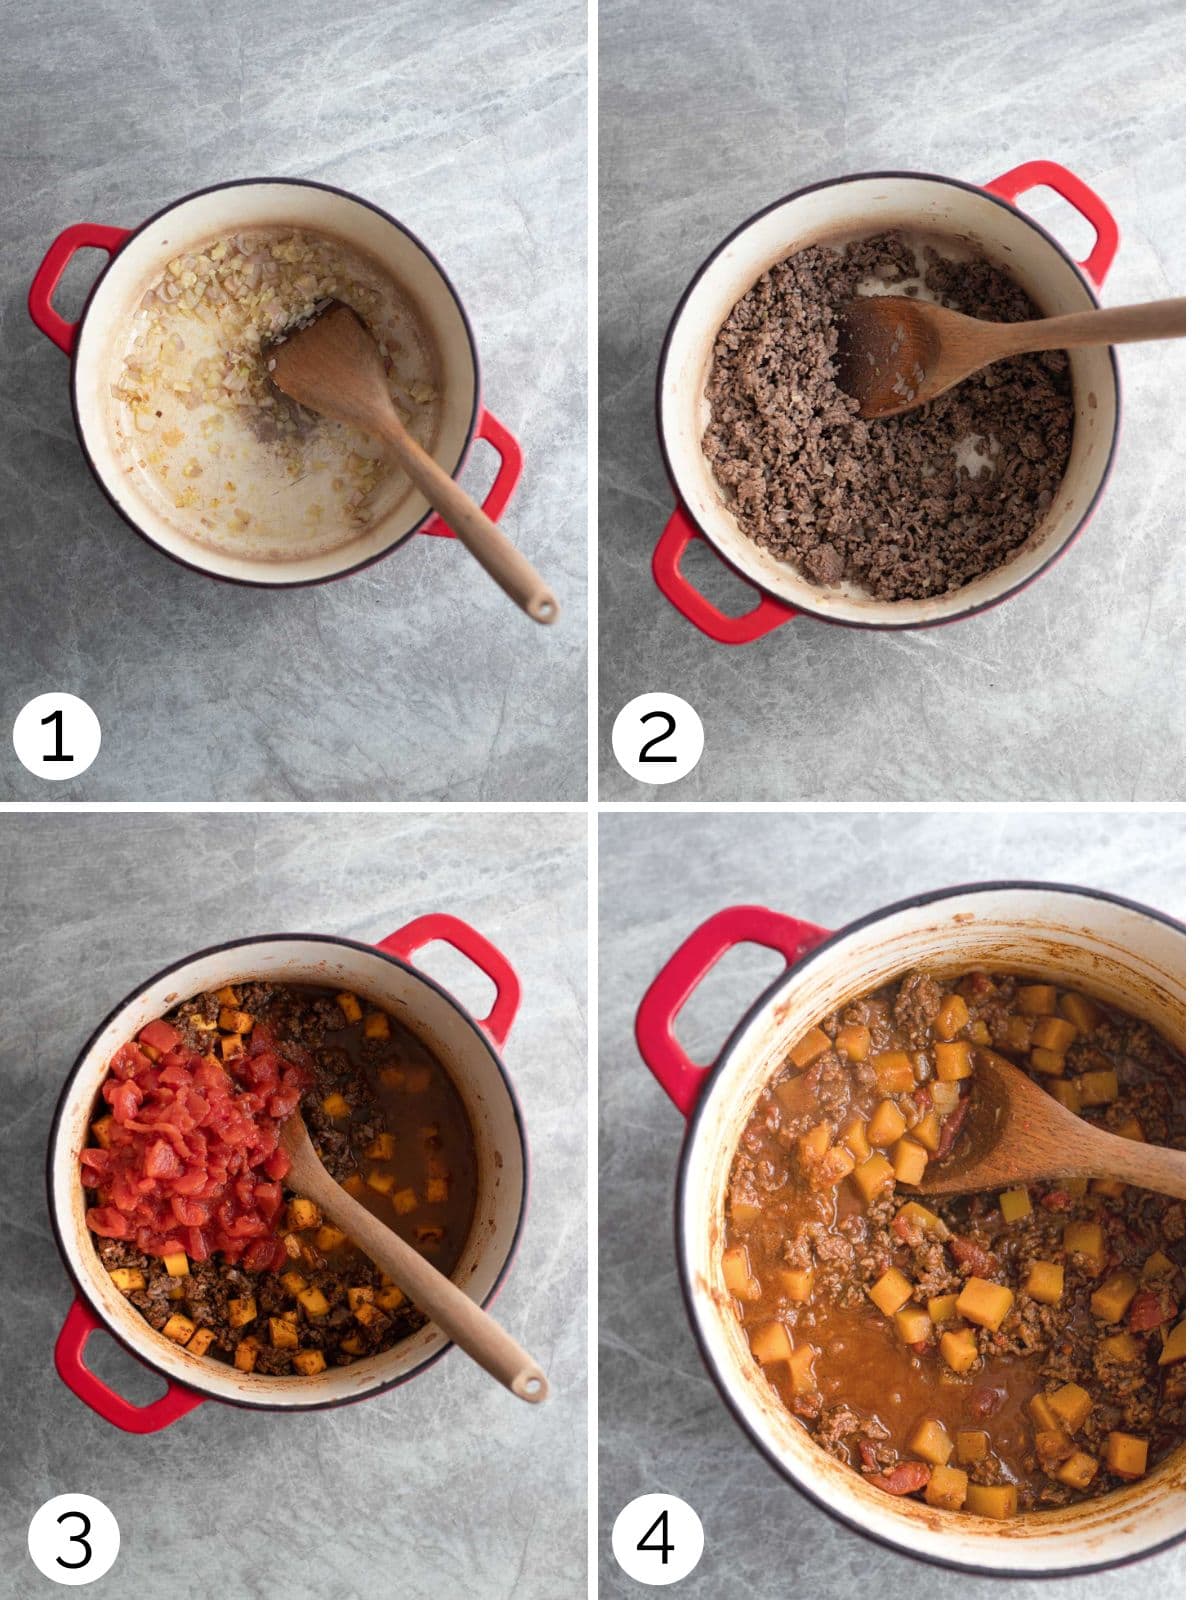 Step by step process for making chili.